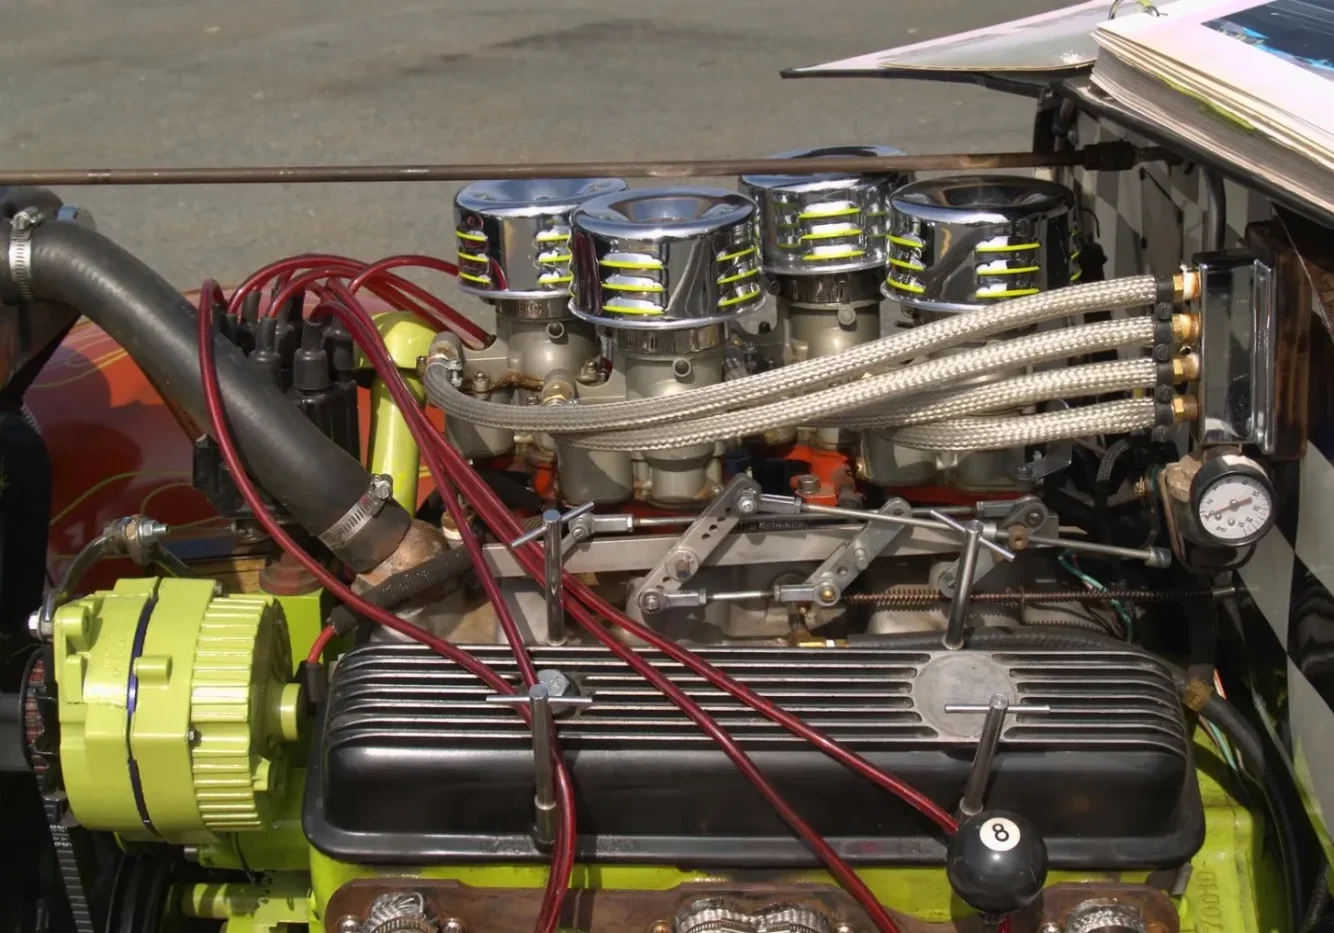 A close up of the engine and other parts.